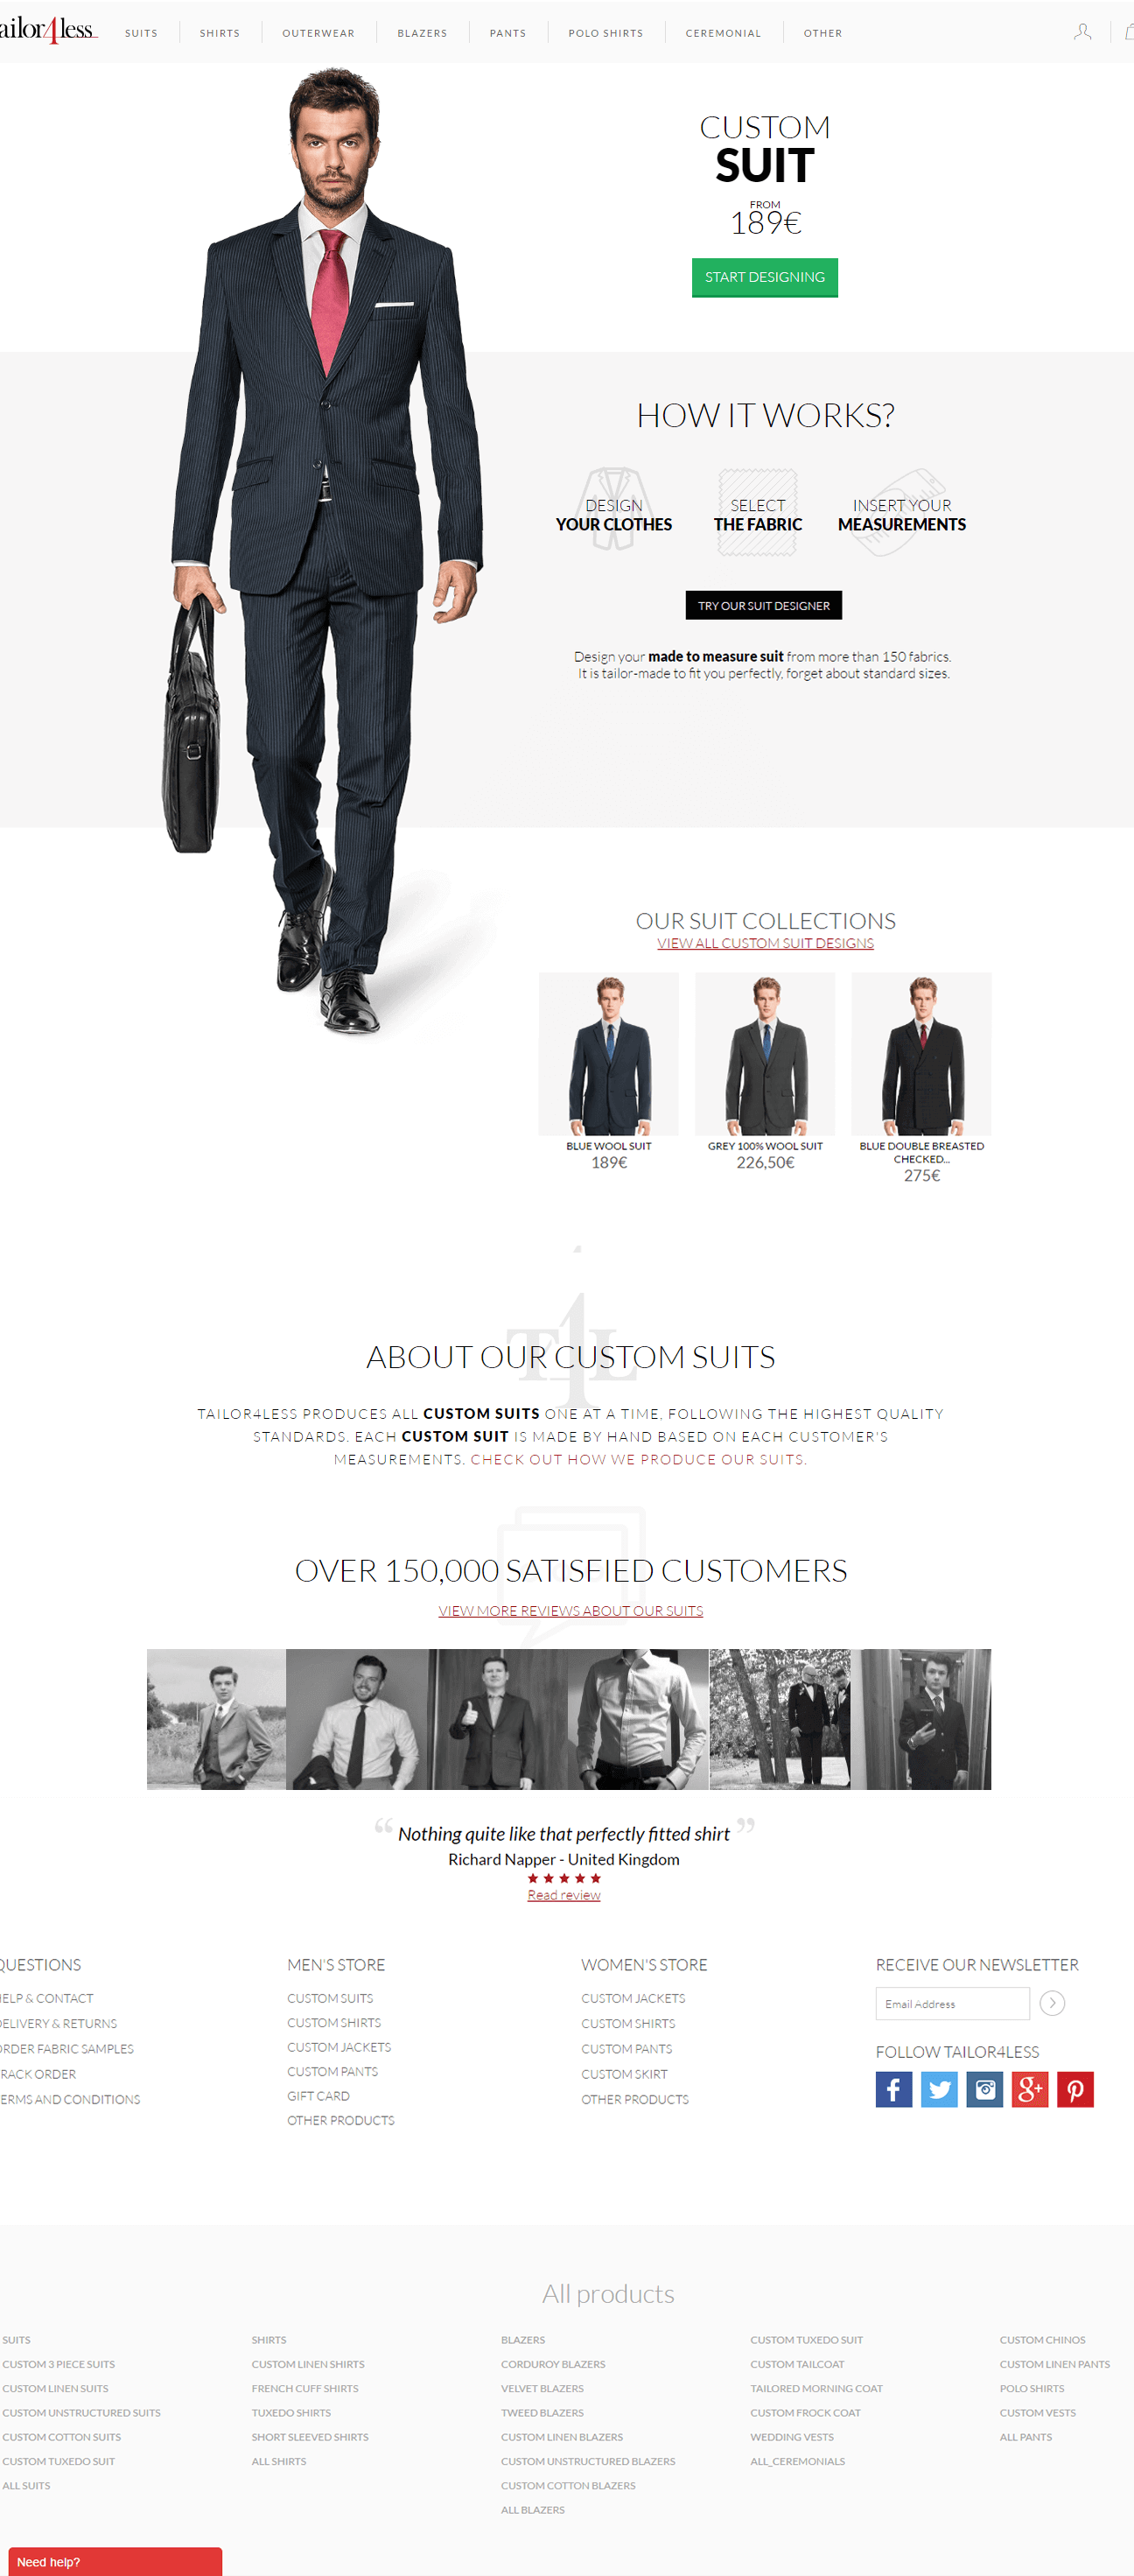 Tailor4less